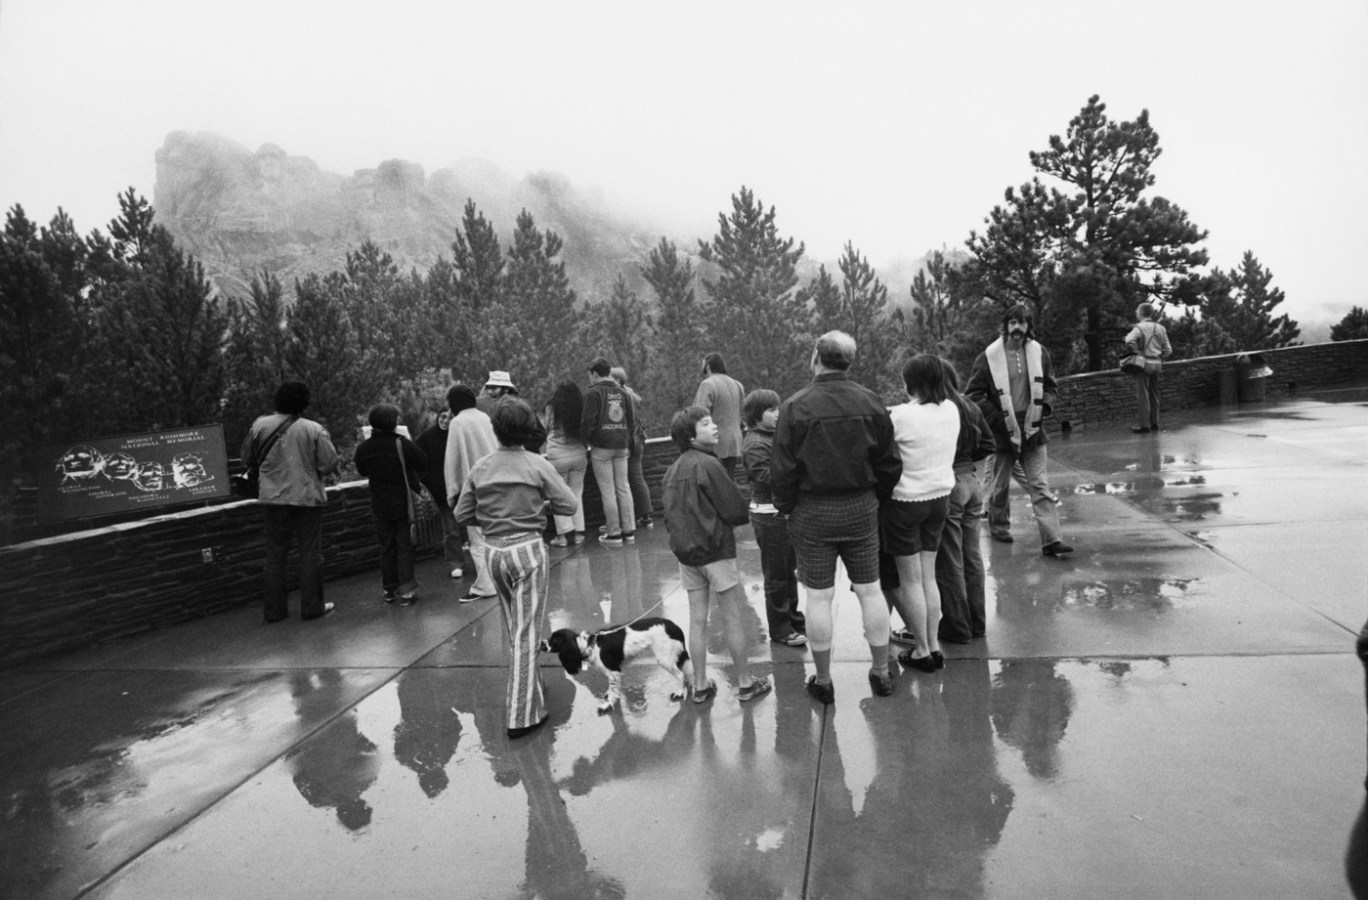 Black-and-white photograph of a family of tourists approaching a look out point of an overcast rock outcrop